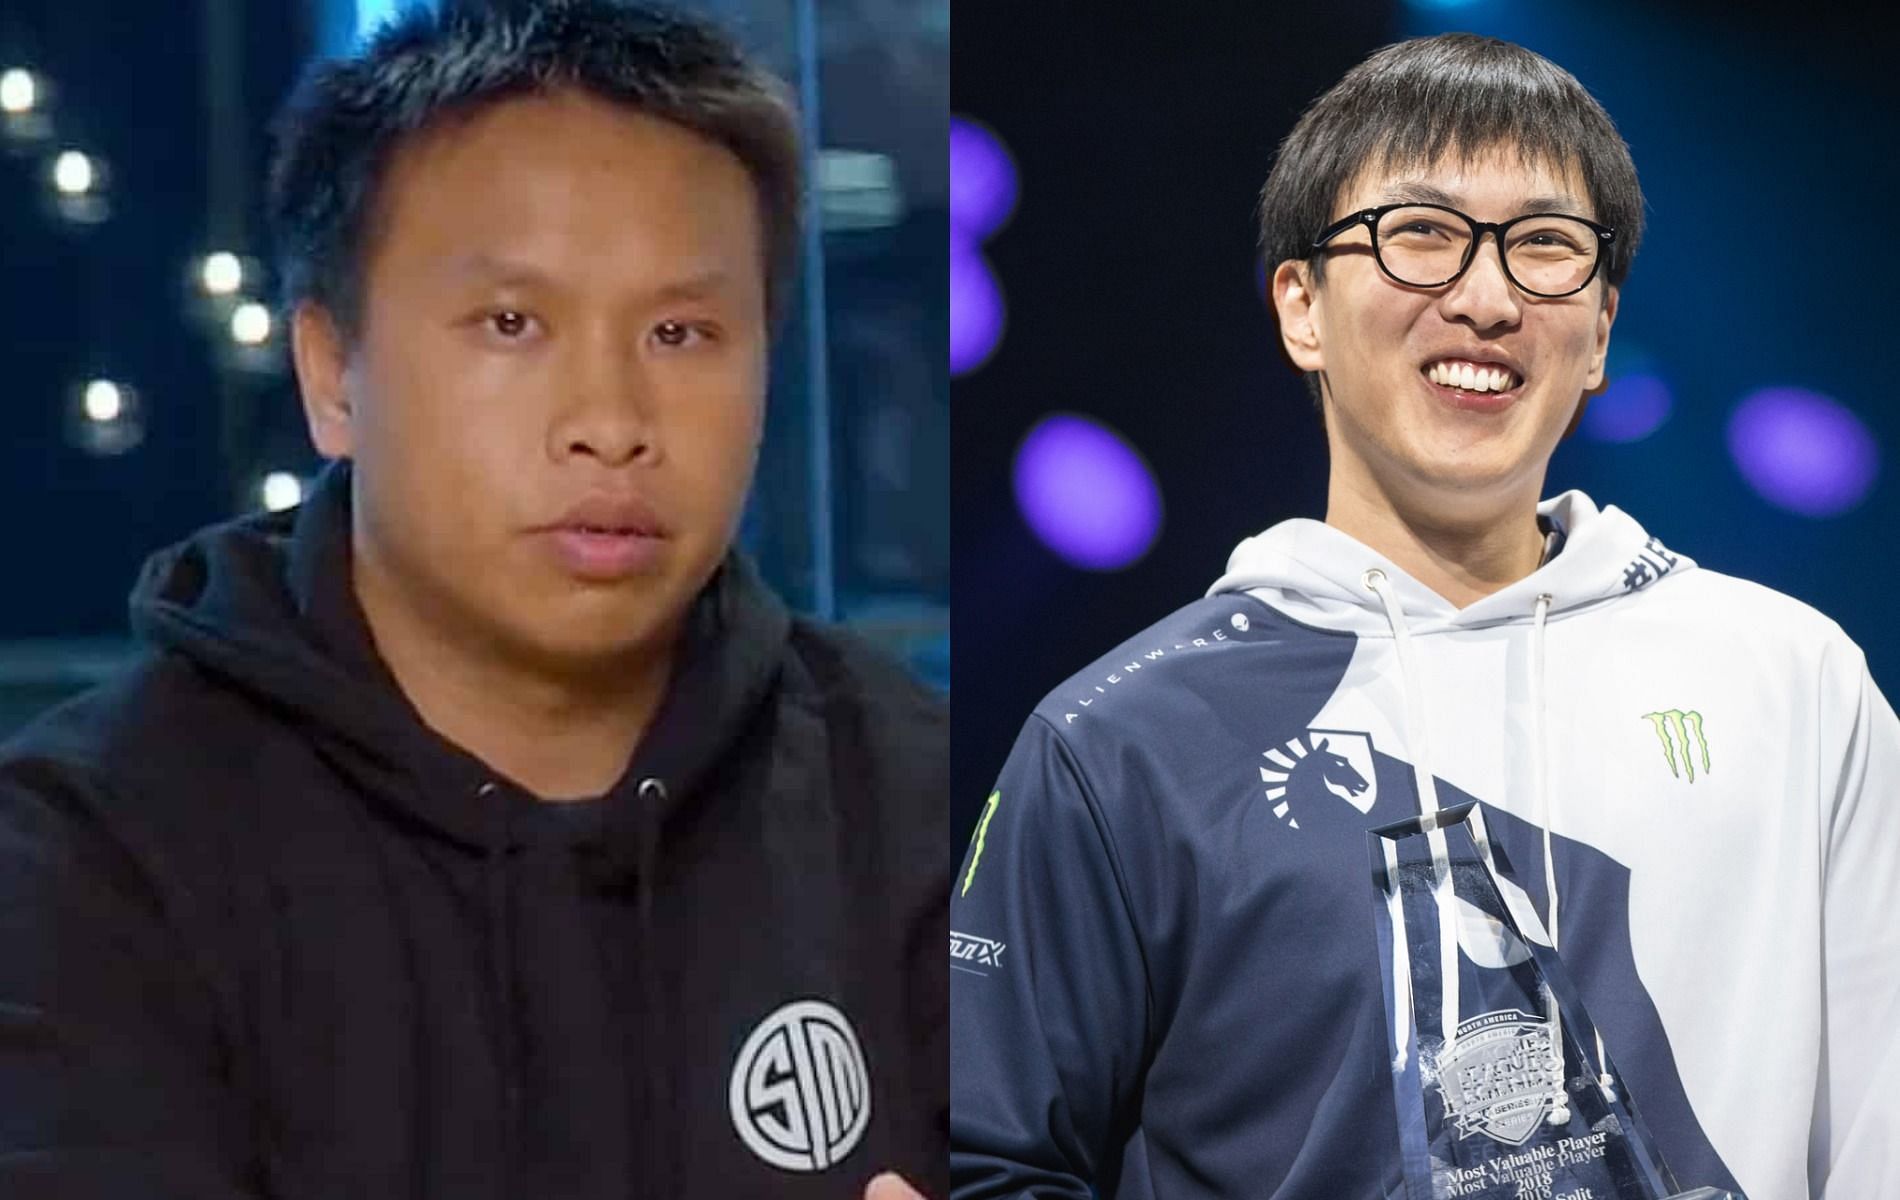 Reginald allegedly had a penchant for verbal abuse towards TSM employees (Images via TSM and Team Liquid)